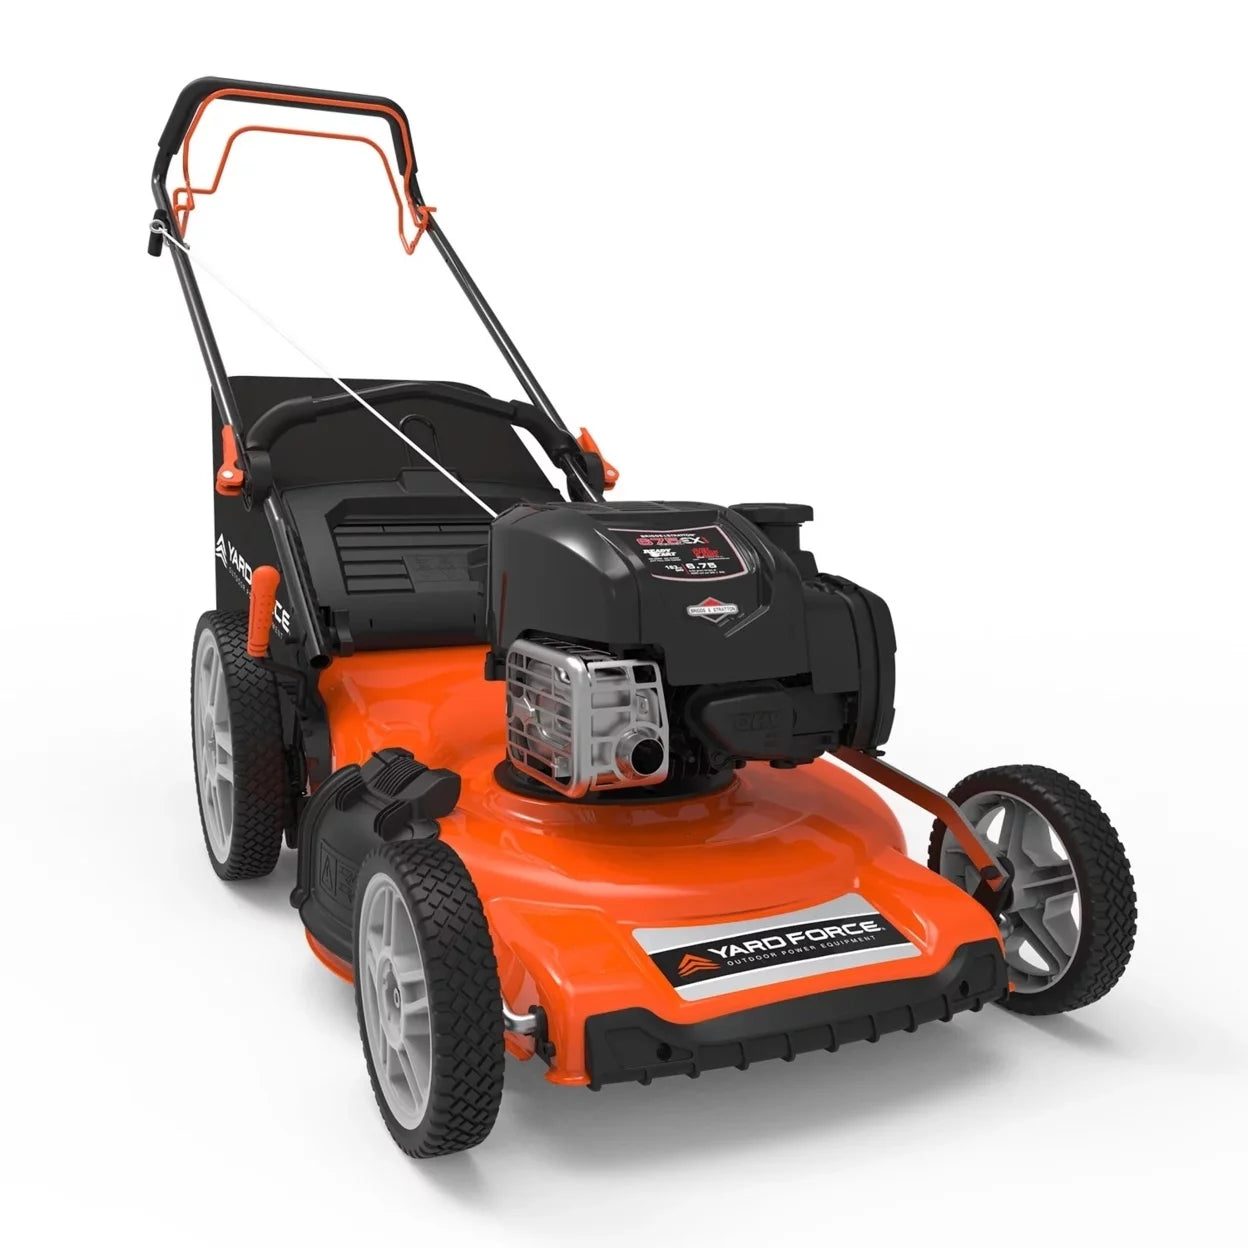 Yard Force Lawn Mower 20 inch 125cc e450 Series Briggs & Stratton Gas Walk Behind with Side-Discharge Cutting System